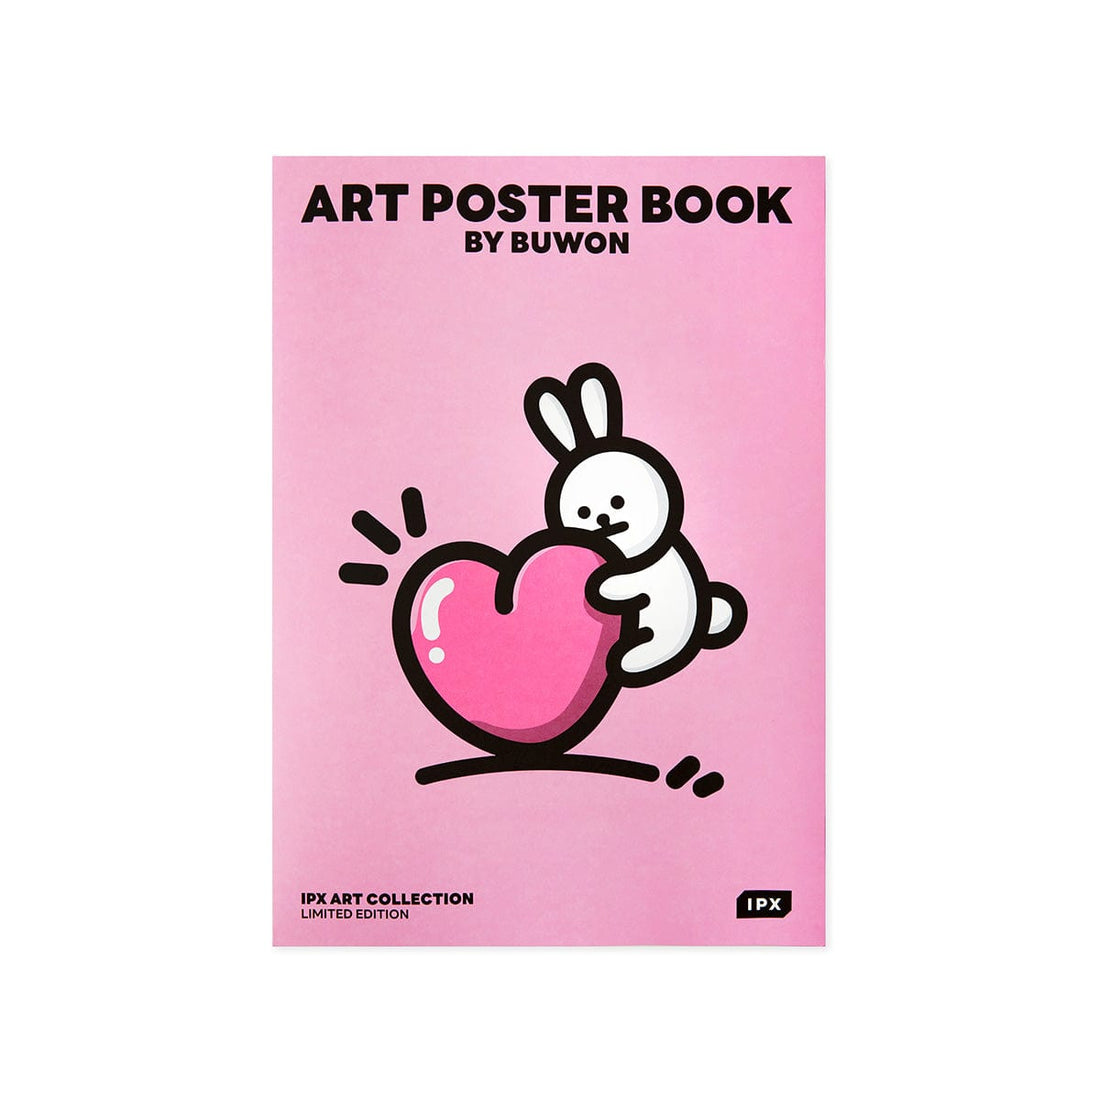 LINE FRIENDS TOYS BOOKET BUWON B.B.Rabbit POSTER BOOKLET [IPX ART COLLECTION]